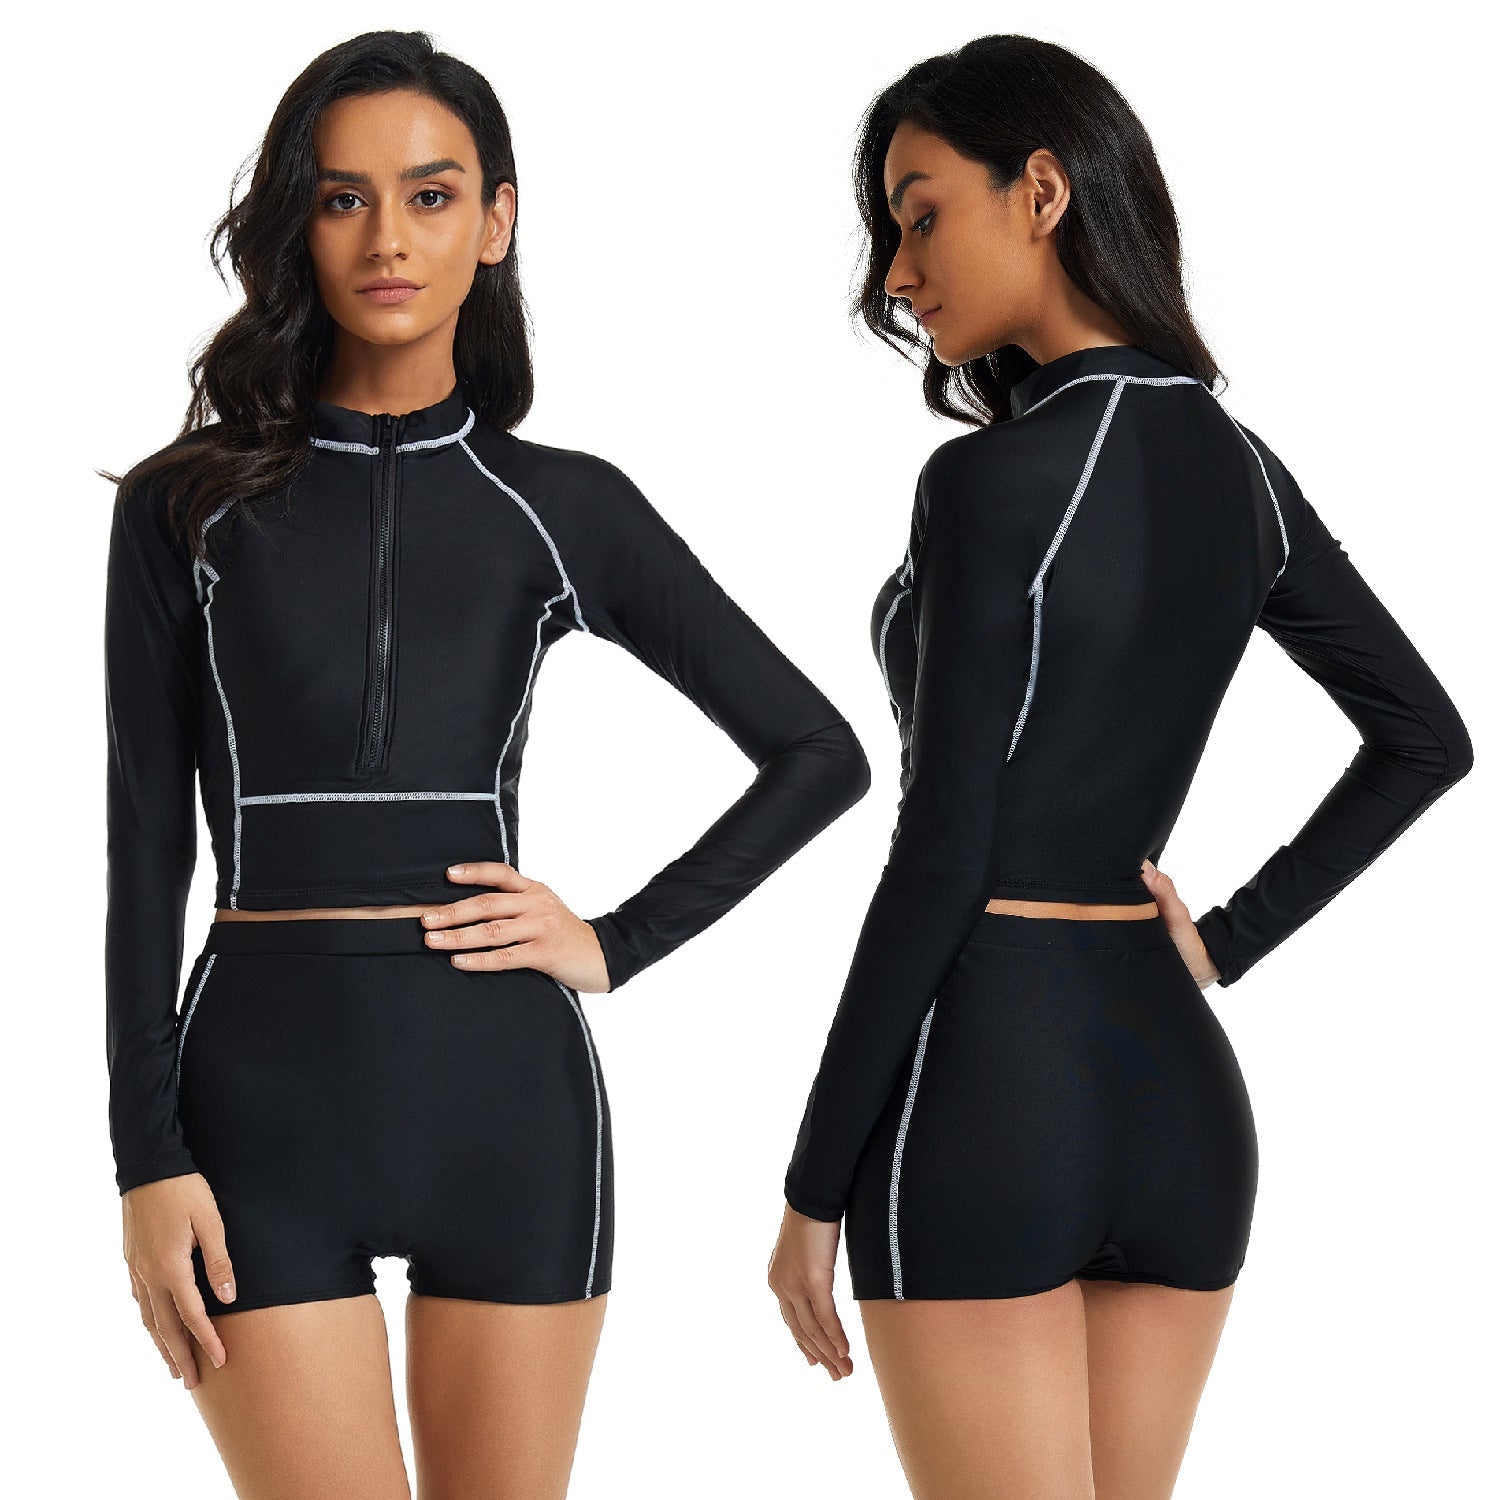 Black Long Sleeves Surfing Wetsuits for Women-Swimwear-Free Shipping at meselling99